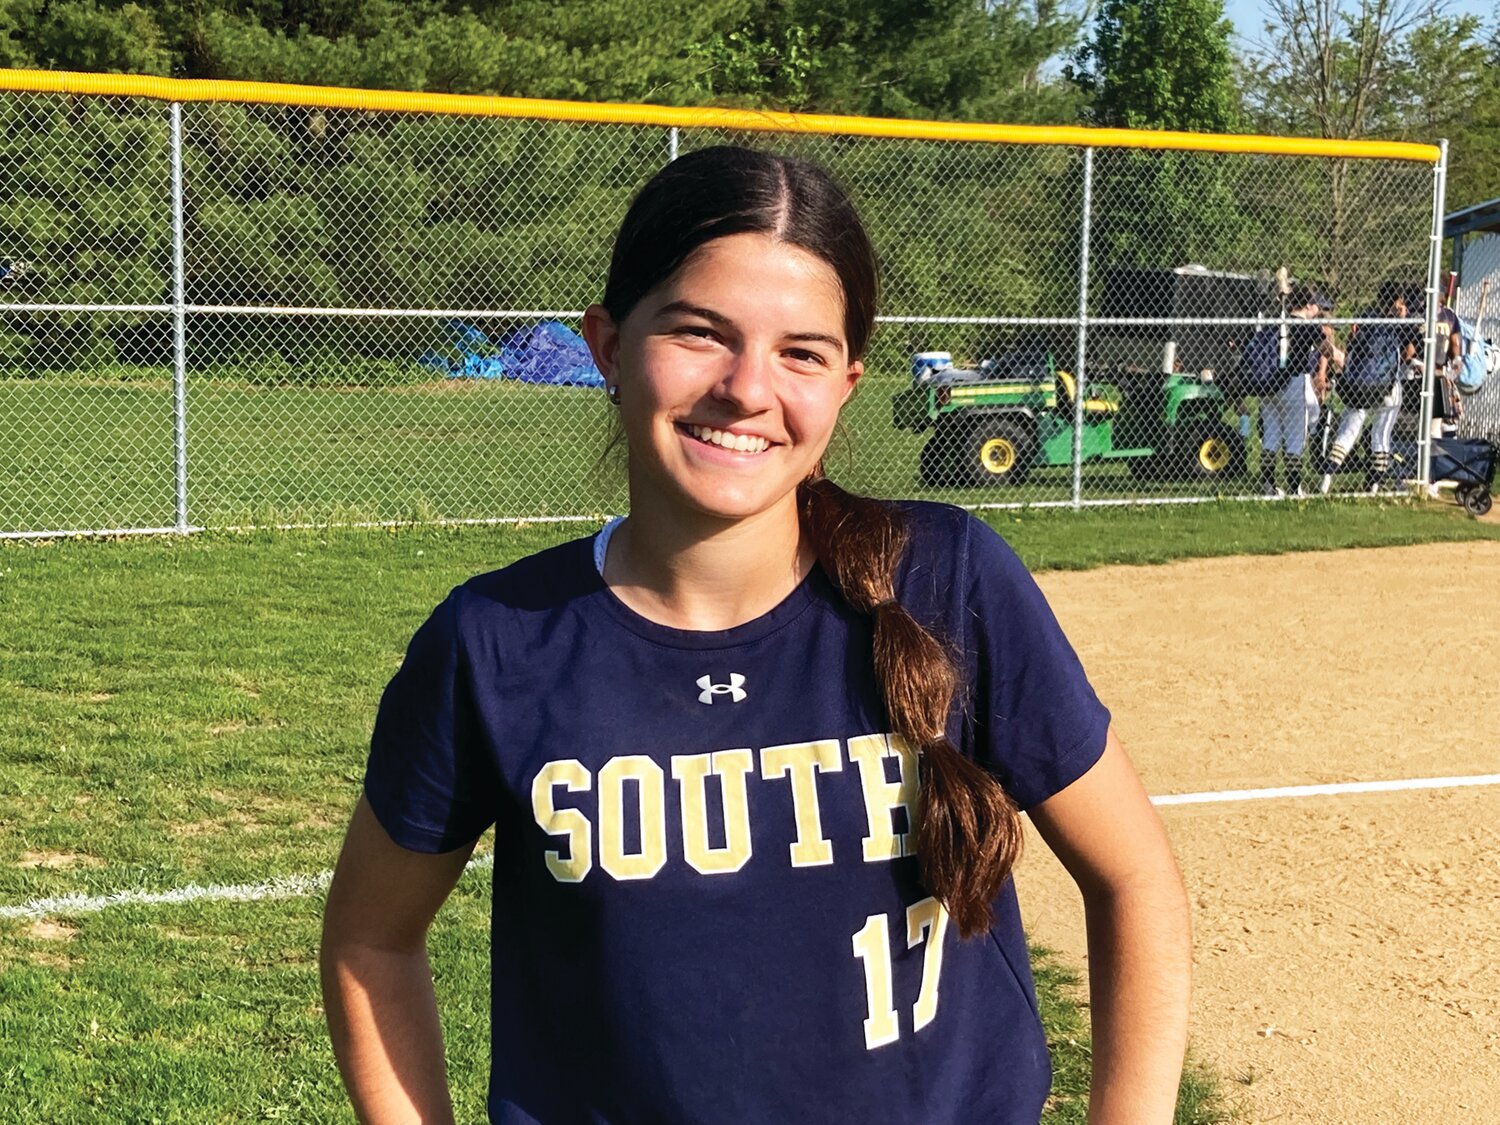 Council Rock South pitcher Lexi Waring tossed a three-hit, 14-strikeout complete game in a 1-0 win over Central Bucks West.